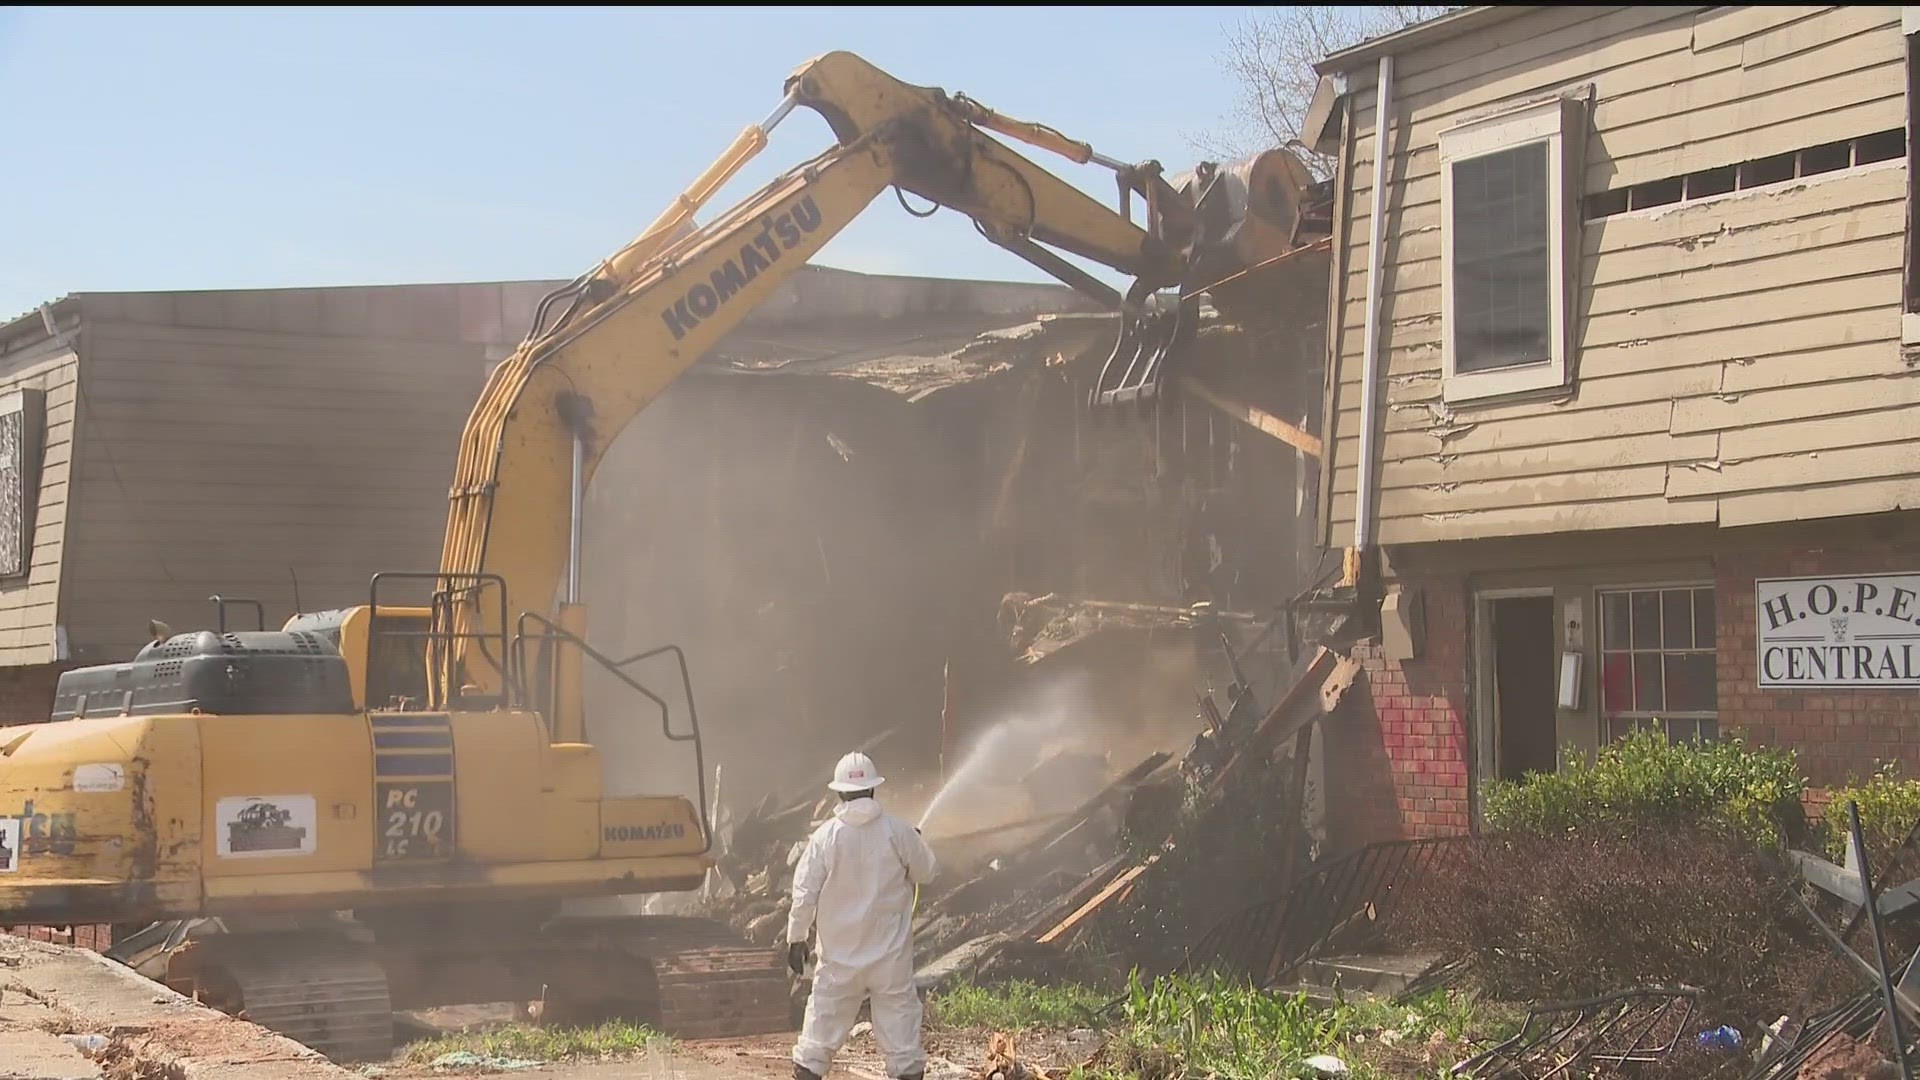 The partial demolition comes as the City of Atlanta searches for new developers.